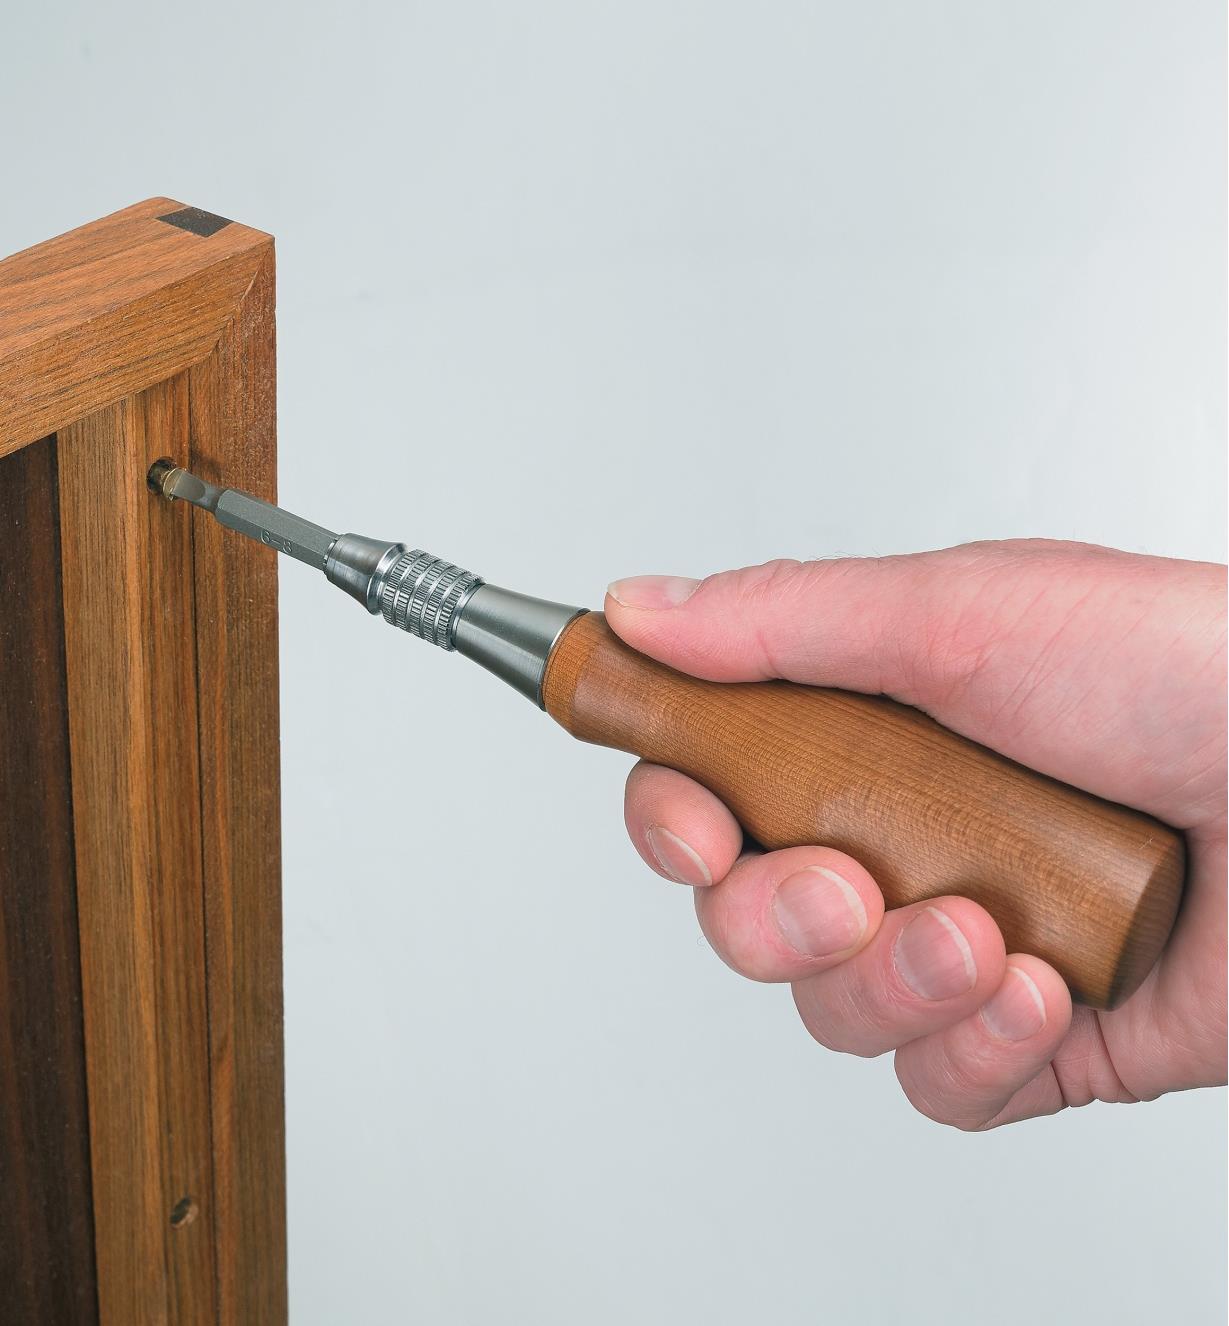 Installing a a screw with the screwdriver